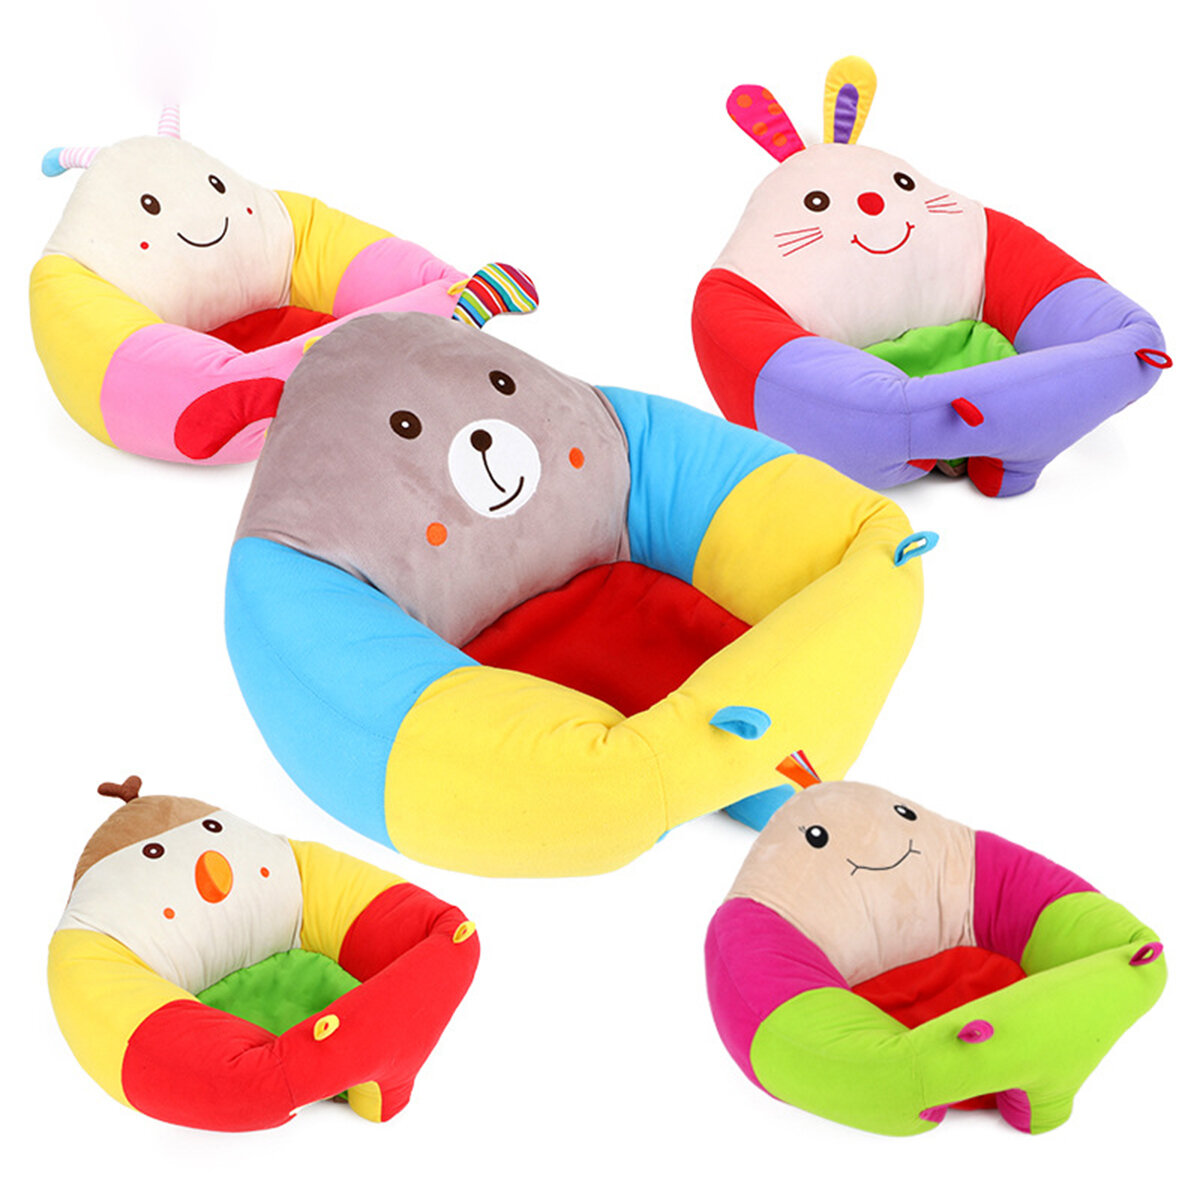 Infant Baby Sitting Chair Soft Cartoon Chair Pillow Cushion Sofa Plush Learning Chair Holder Plush Toys for Childrens